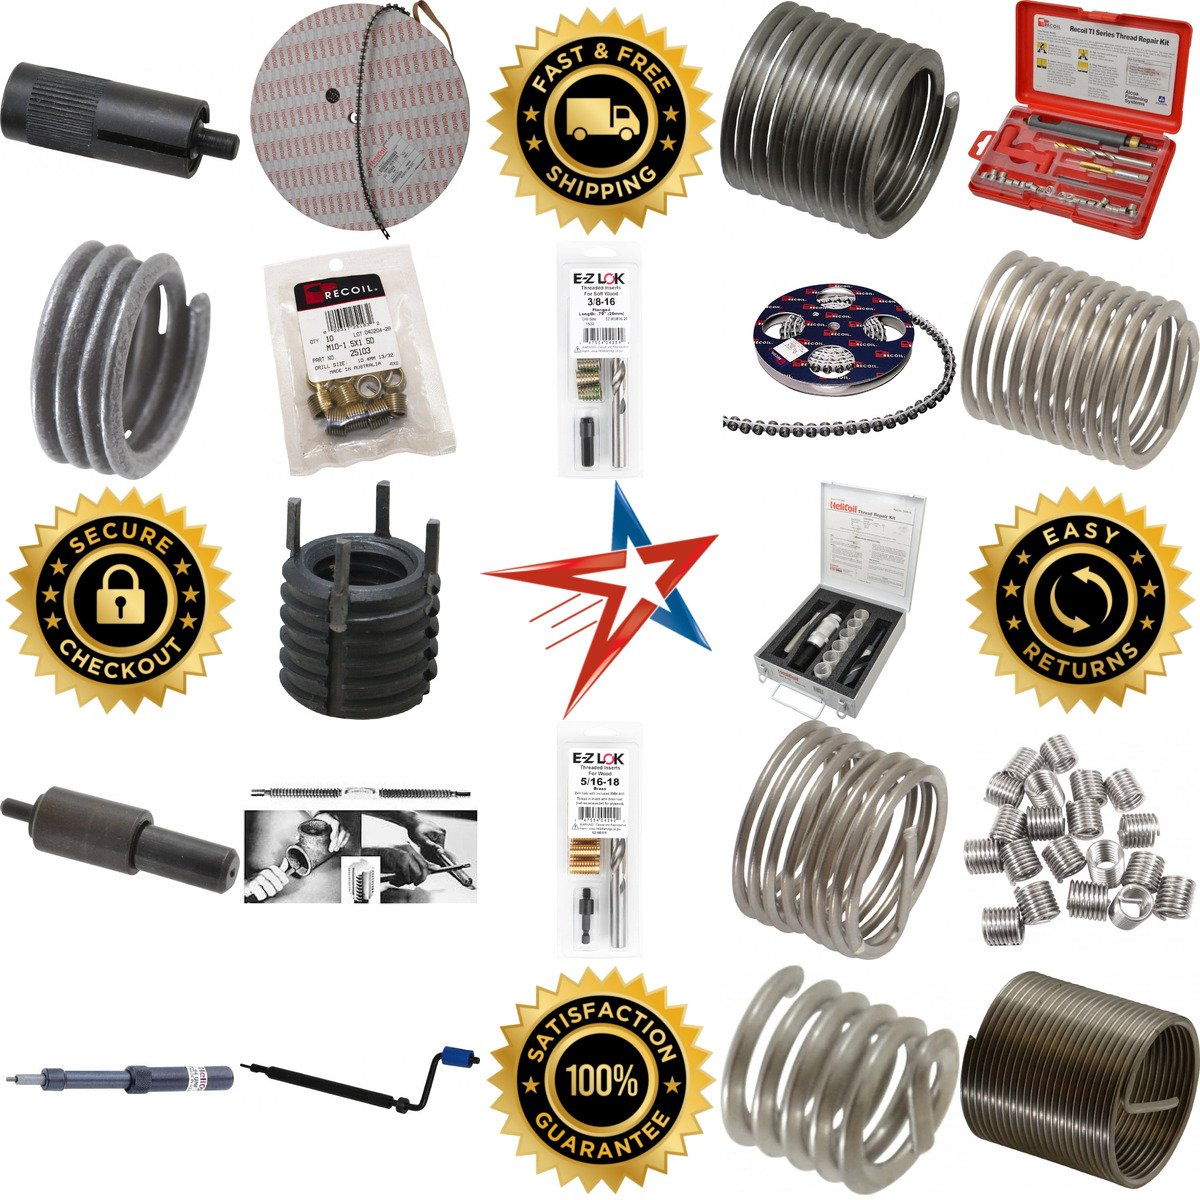 A selection of Thread Repair and Reinforcement products on GoVets